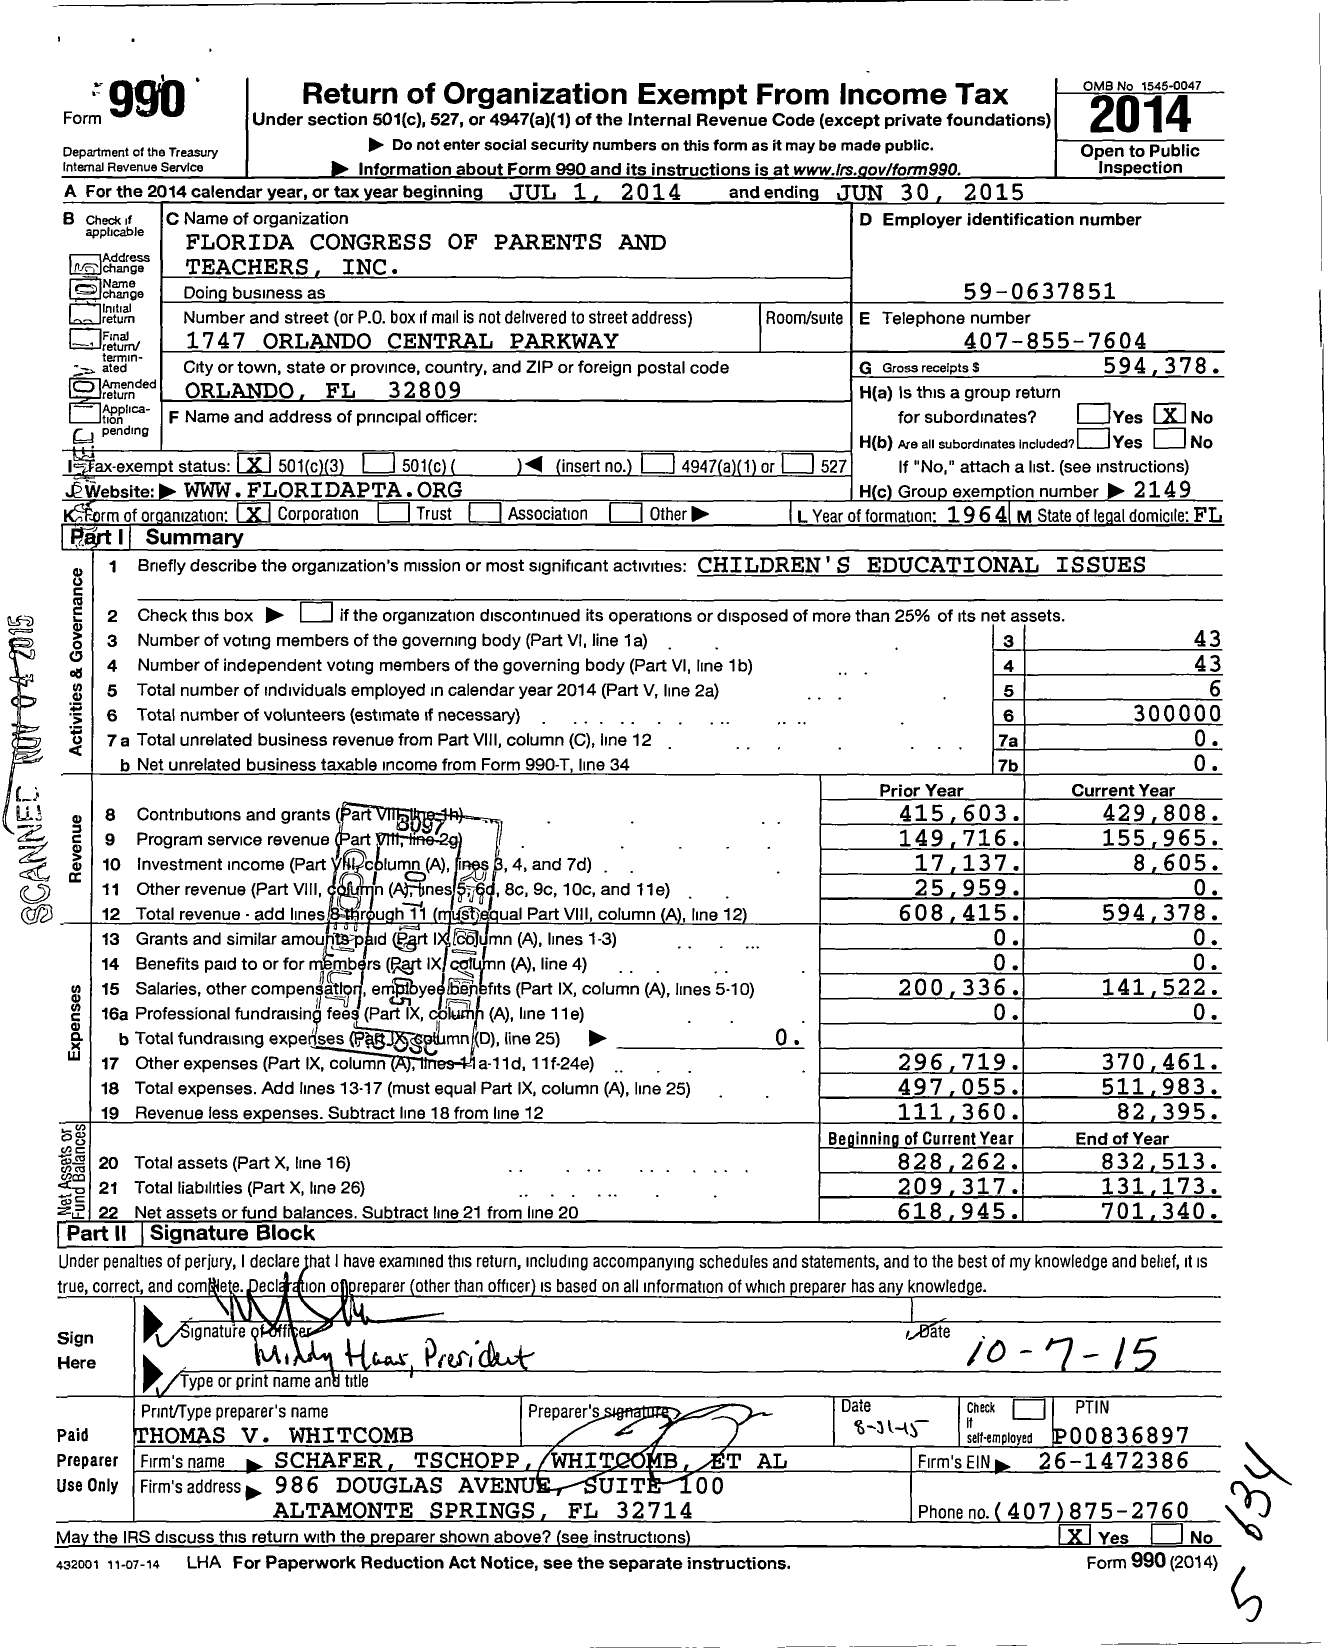 Image of first page of 2014 Form 990 for Florida Congress of Parents and Teachers